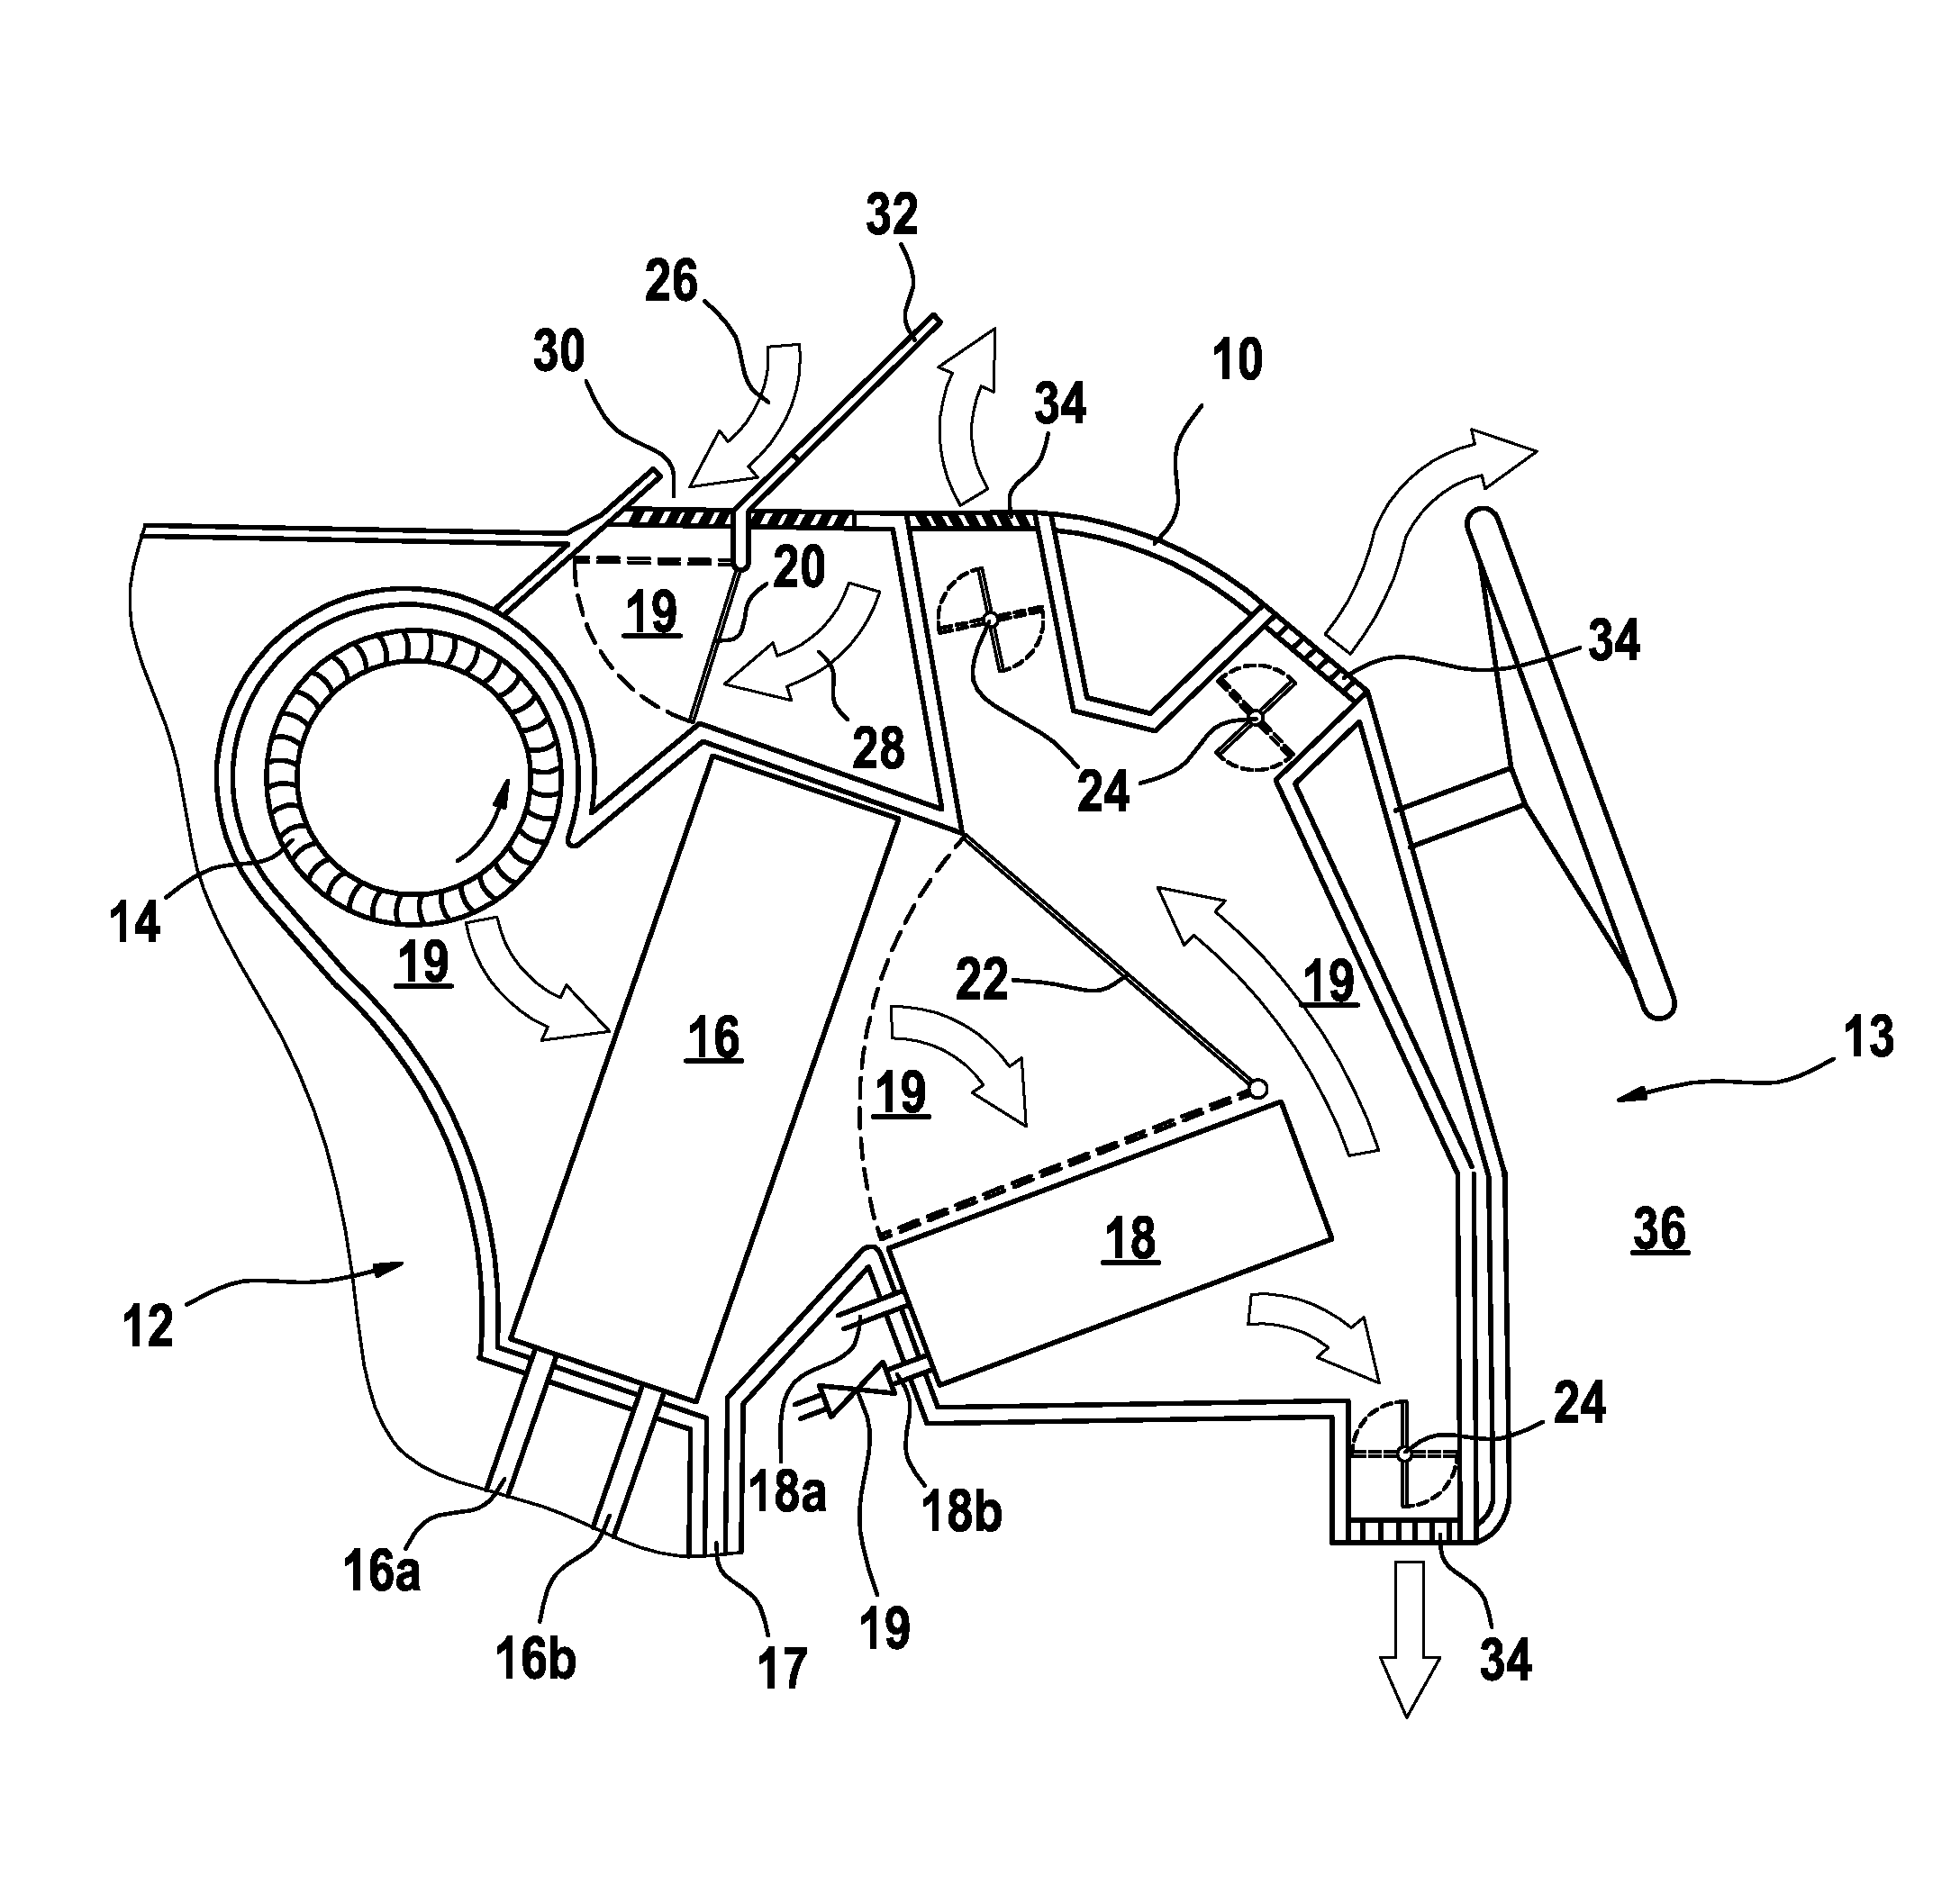 Device for controlling the ventilation apparatus for a motor vehicle interior